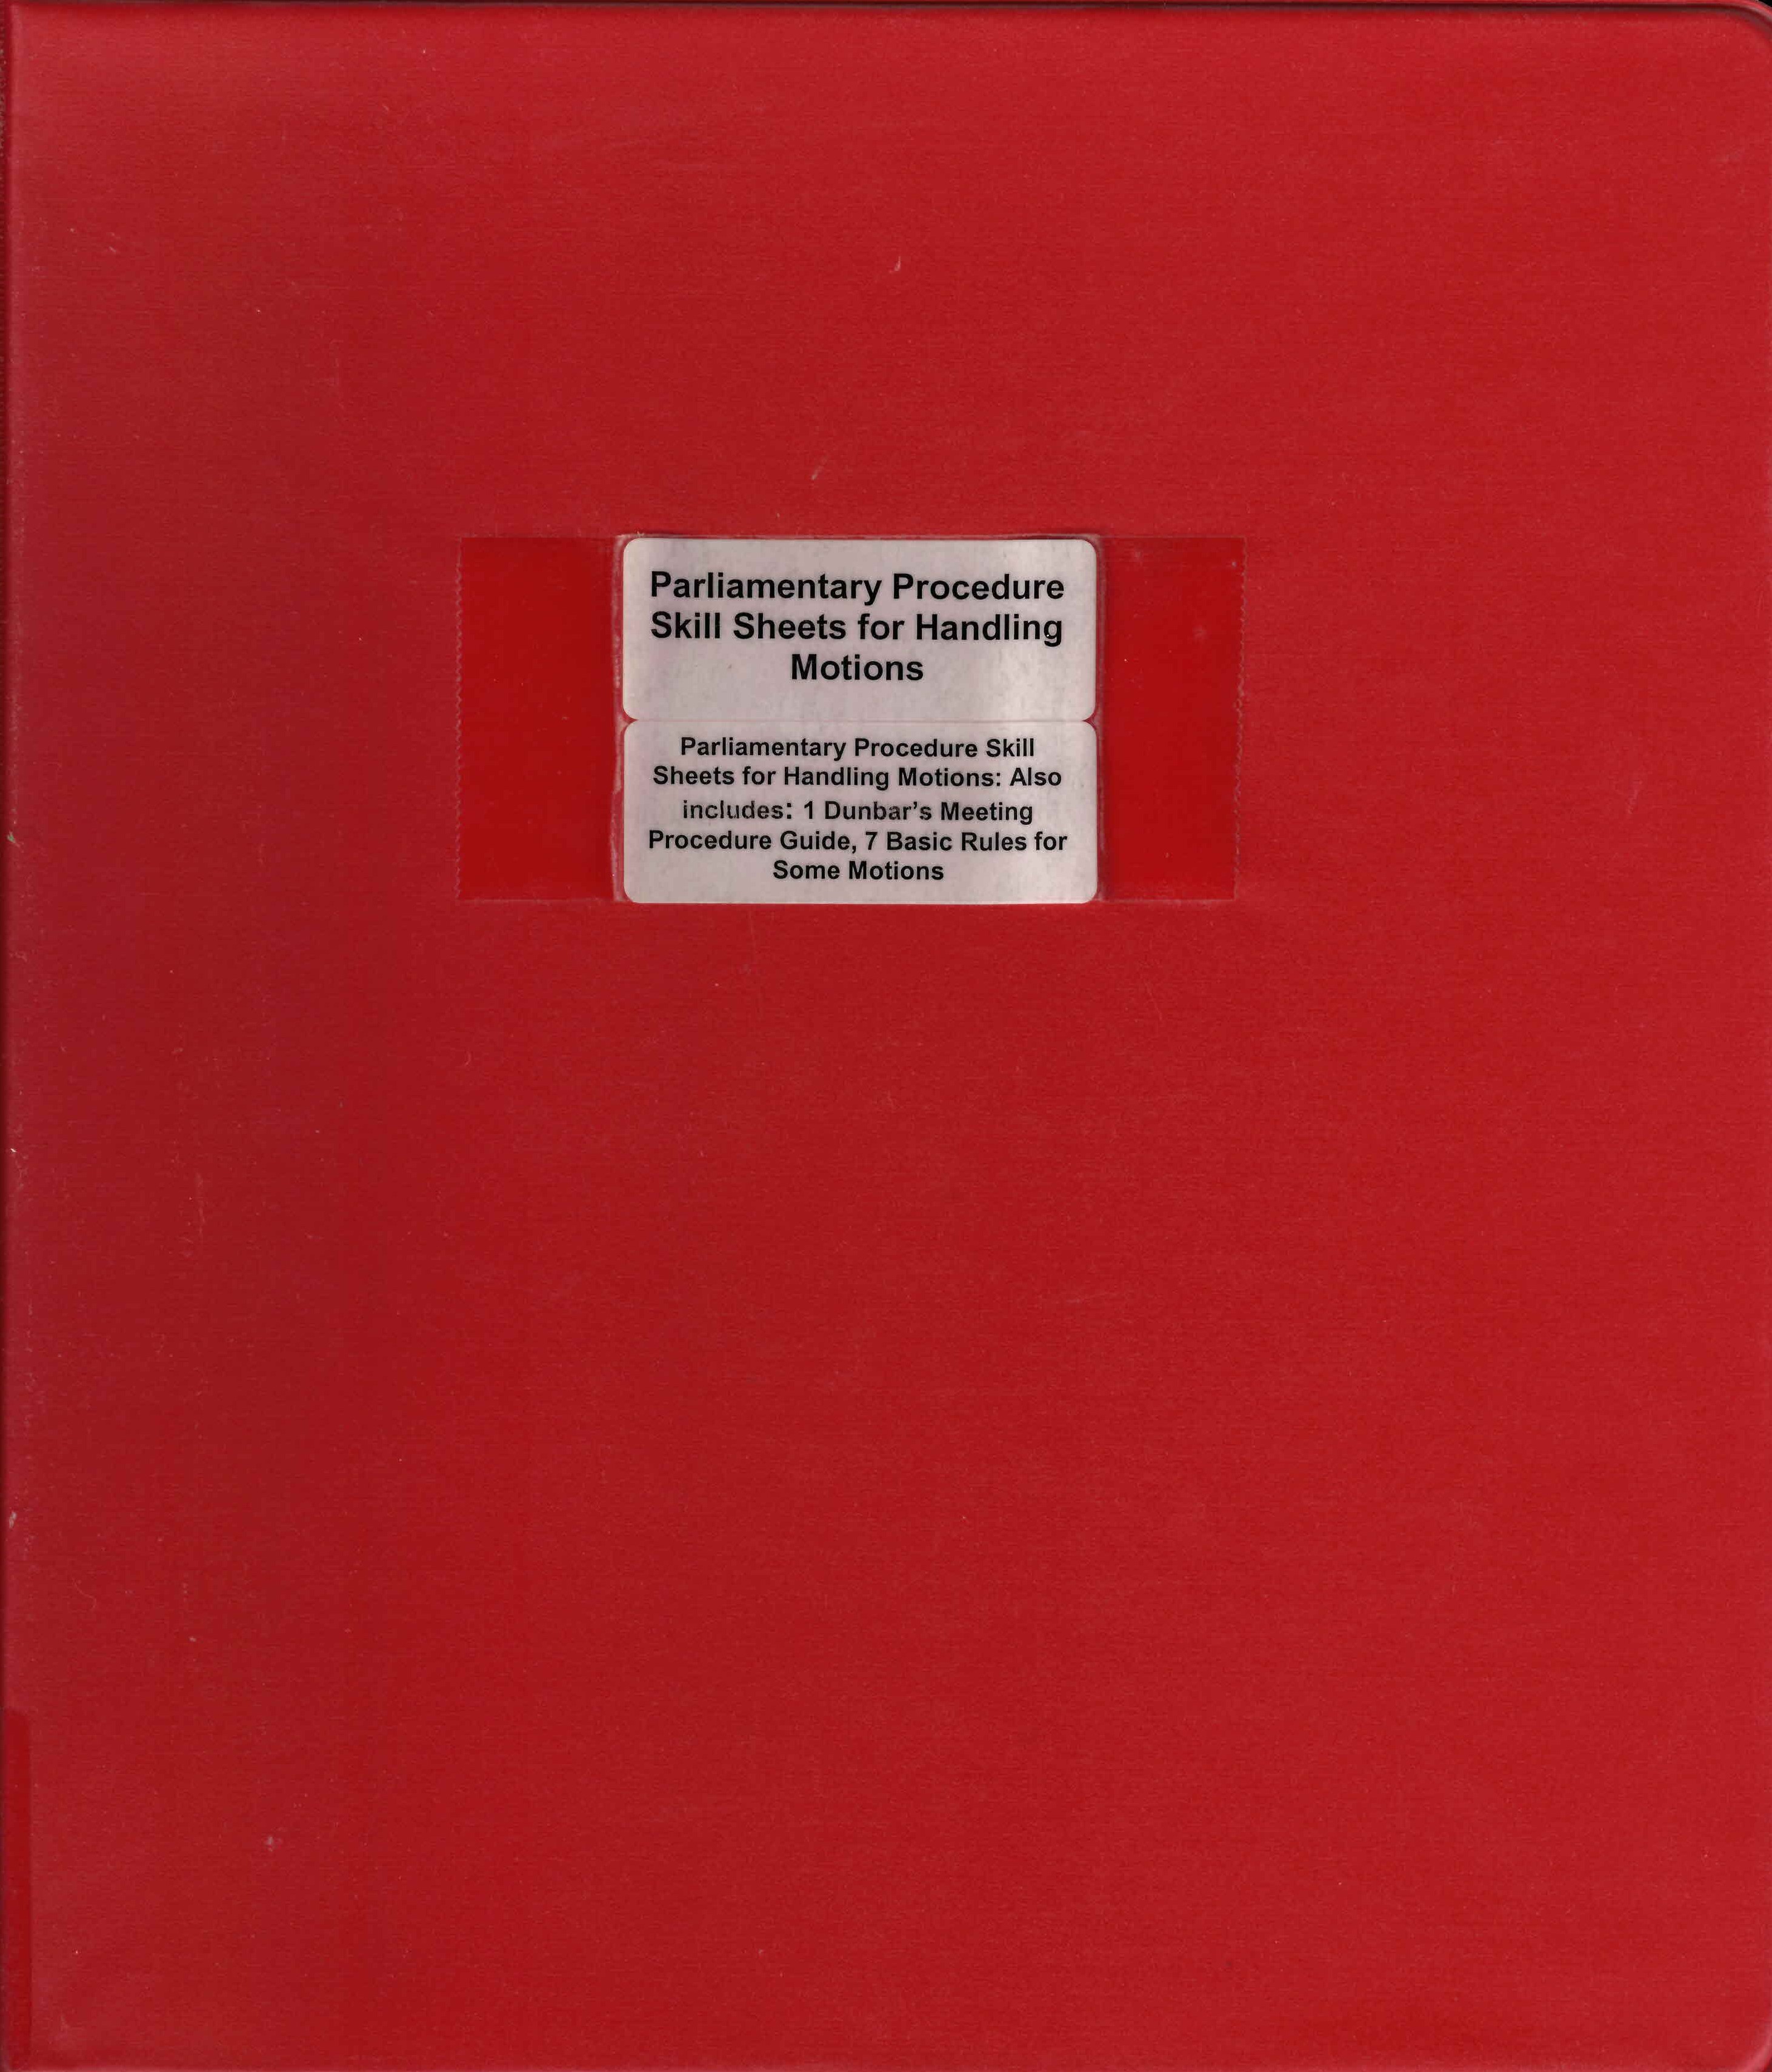 Parliamentary procedure skill sheets for handling motions : tables containing the rules, steps, details, and a script for handling individual motions